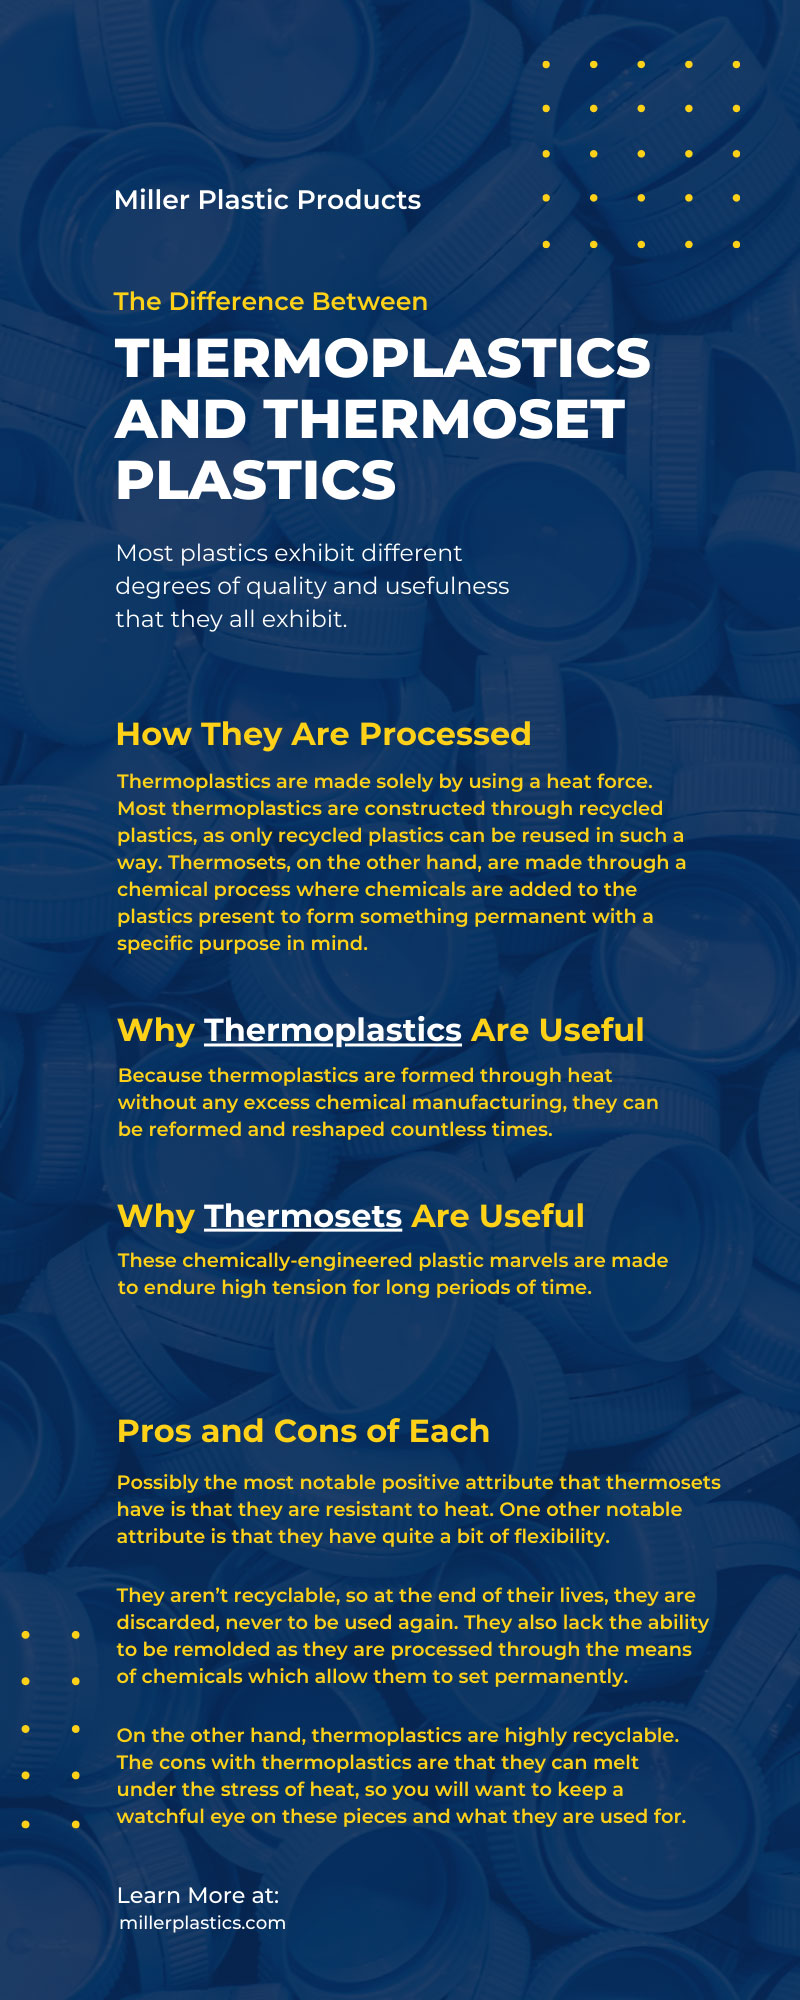 The Difference Between Thermoplastics and Thermoset Plastics